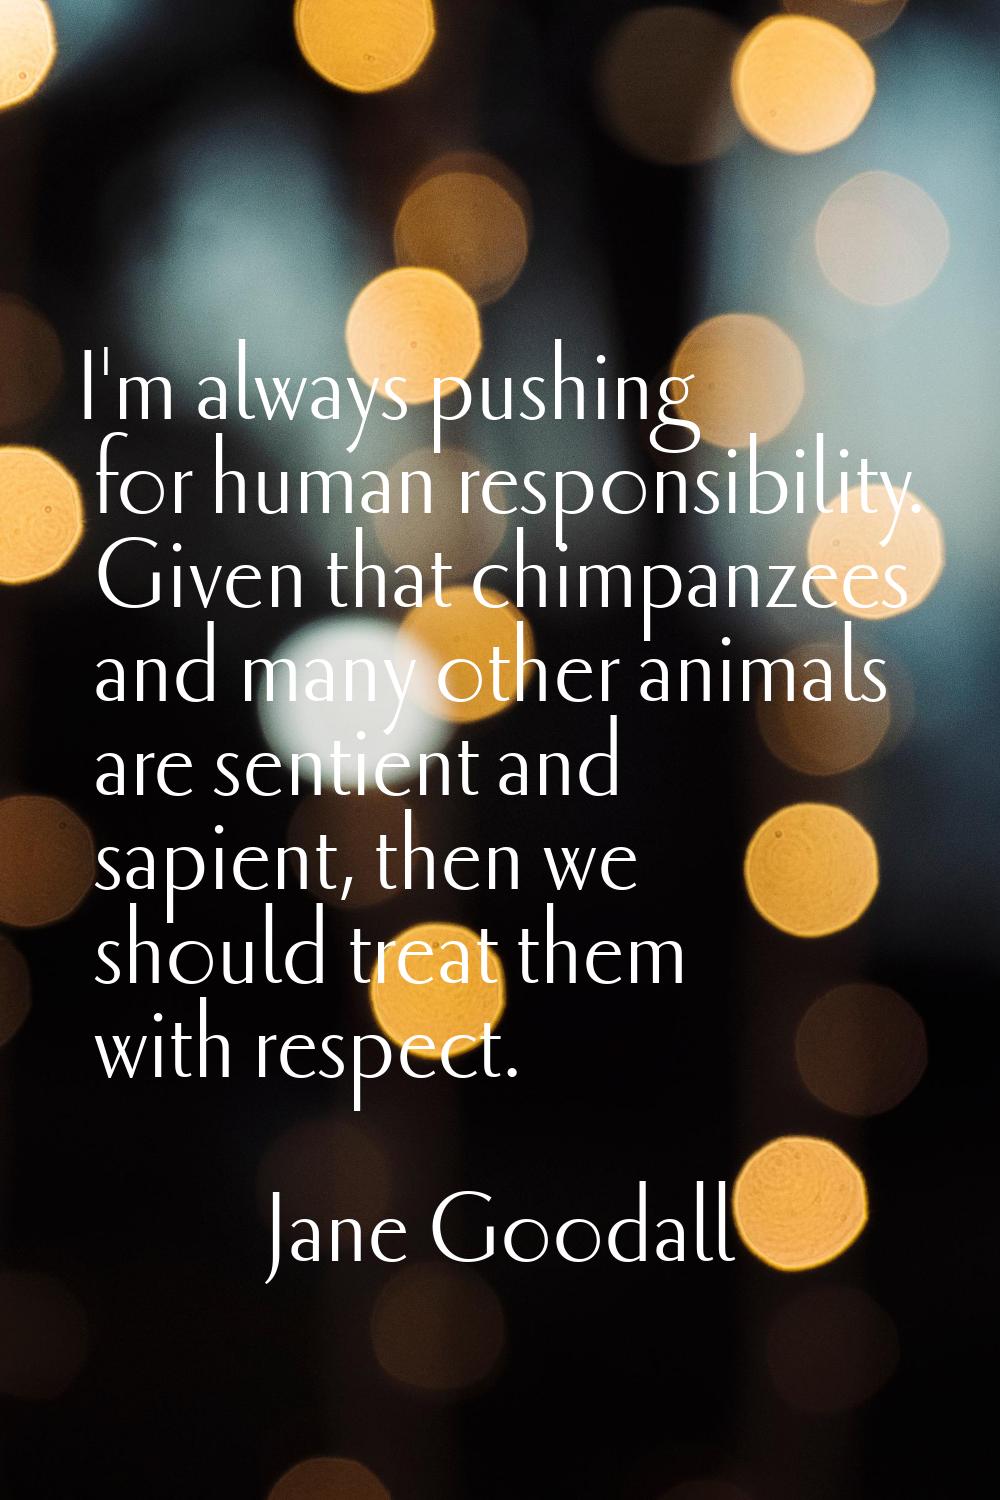 I'm always pushing for human responsibility. Given that chimpanzees and many other animals are sent